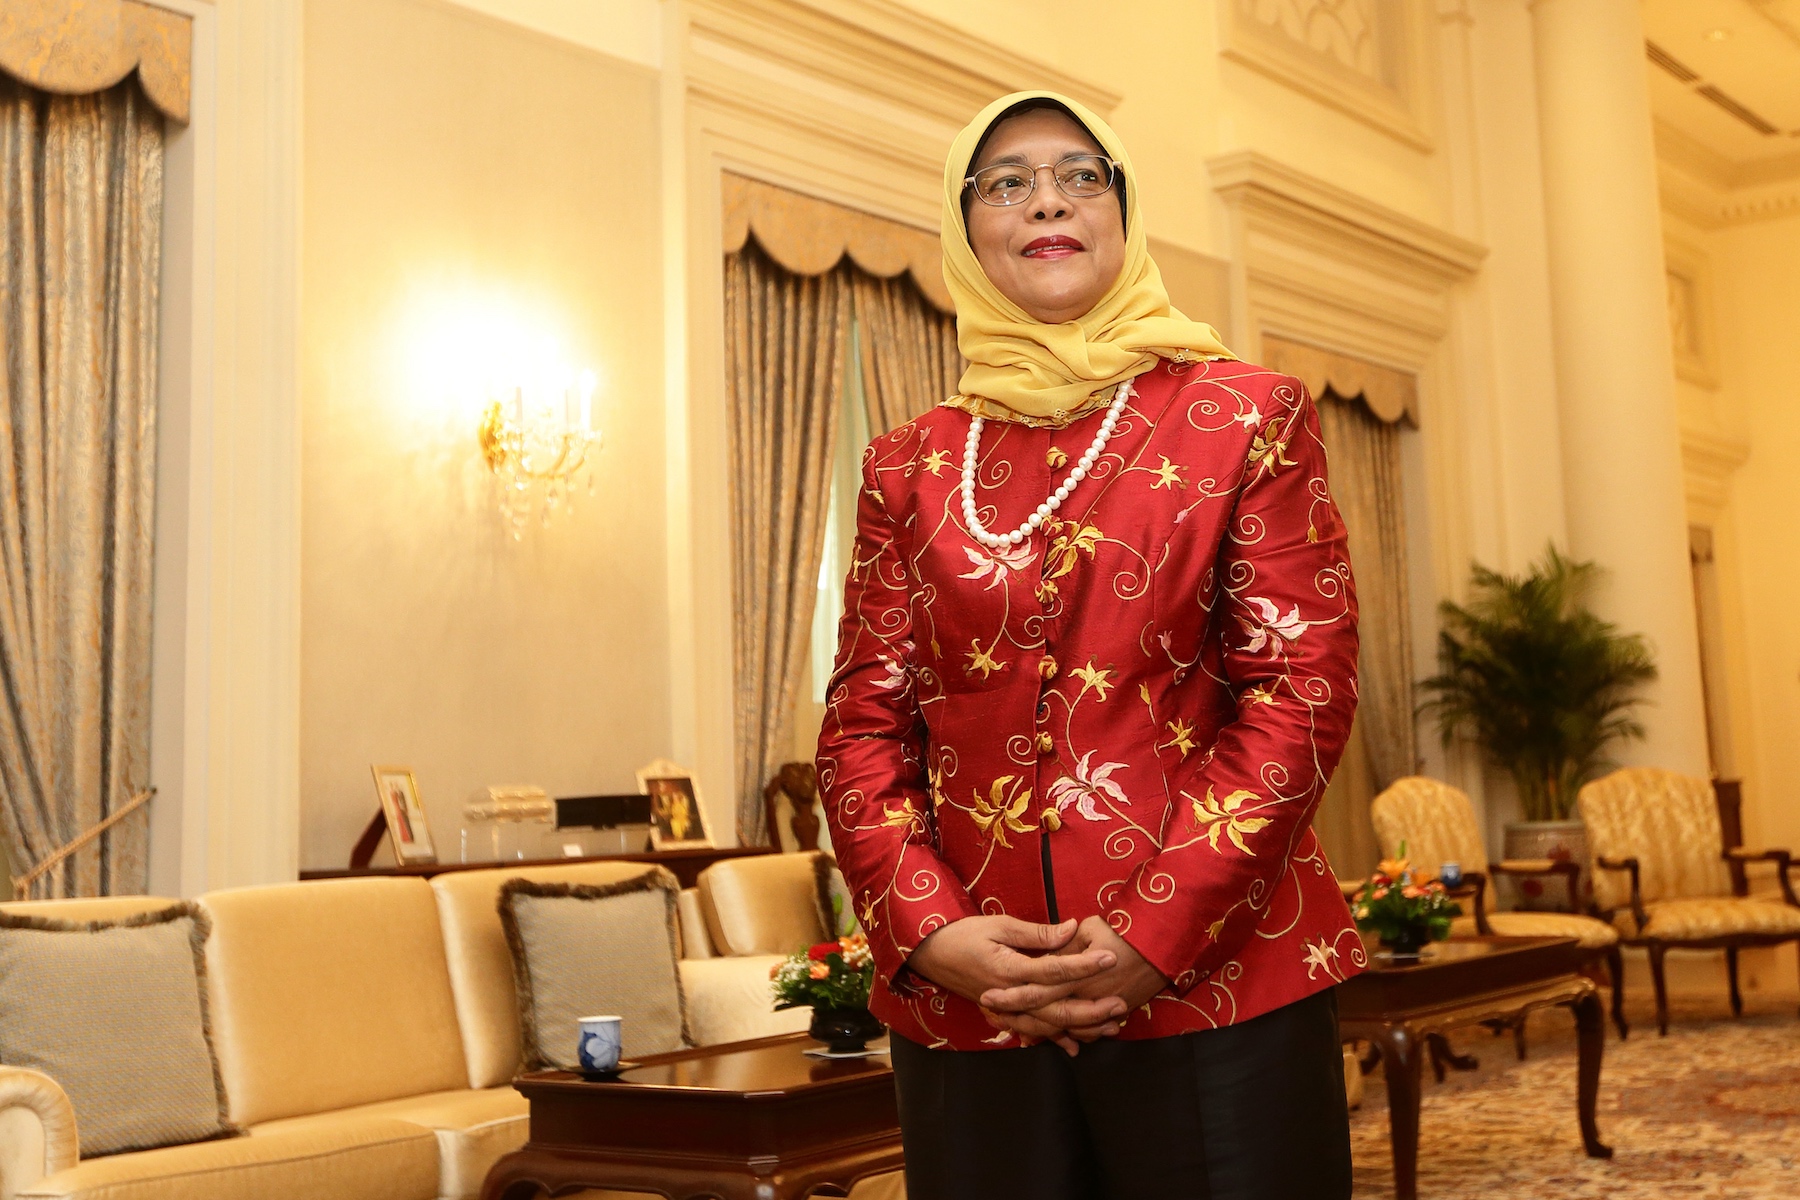 Singaporean President Halimah Yacob stands waiting for a diplomatic meeting with her hands folded and wearing a yellow hijab